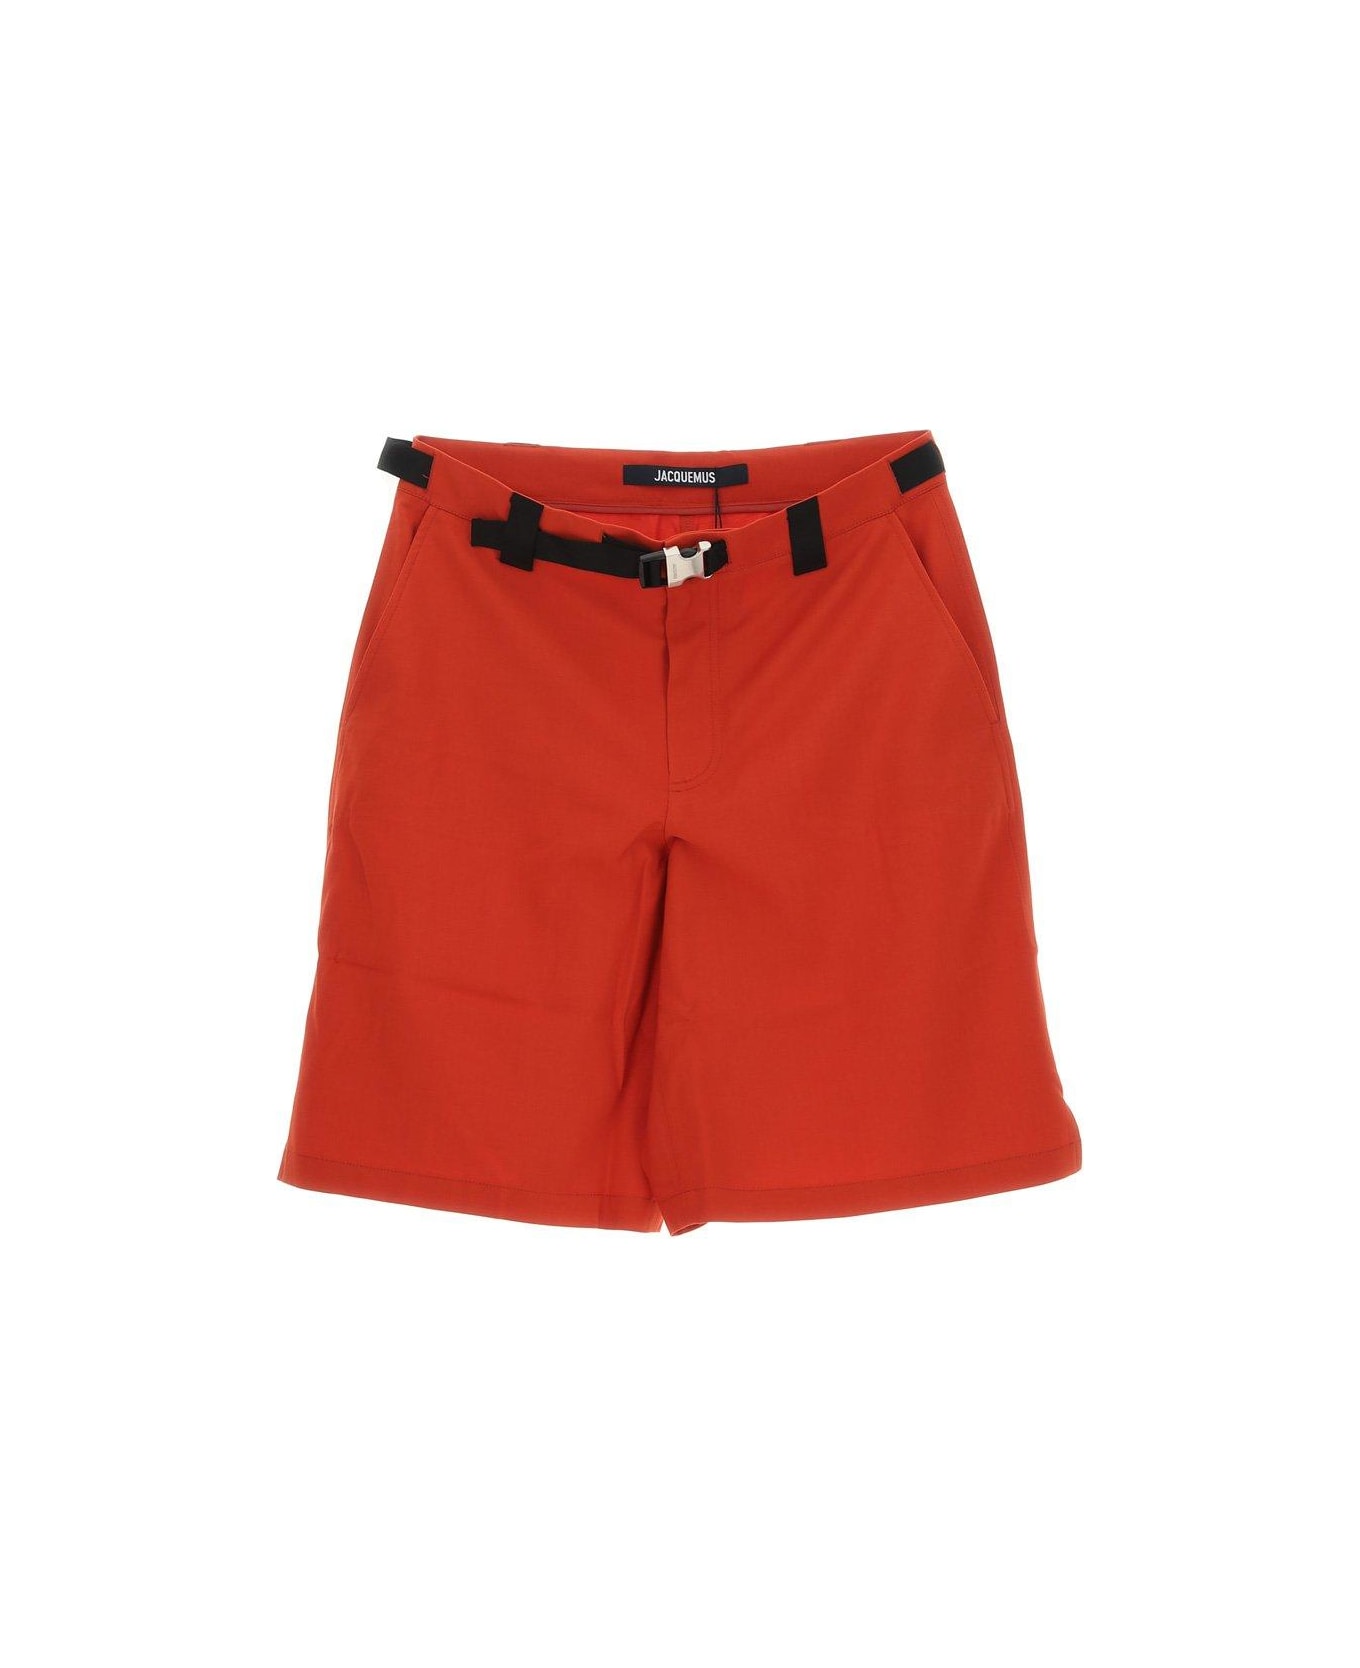 Jacquemus Buckled Shorts - Red